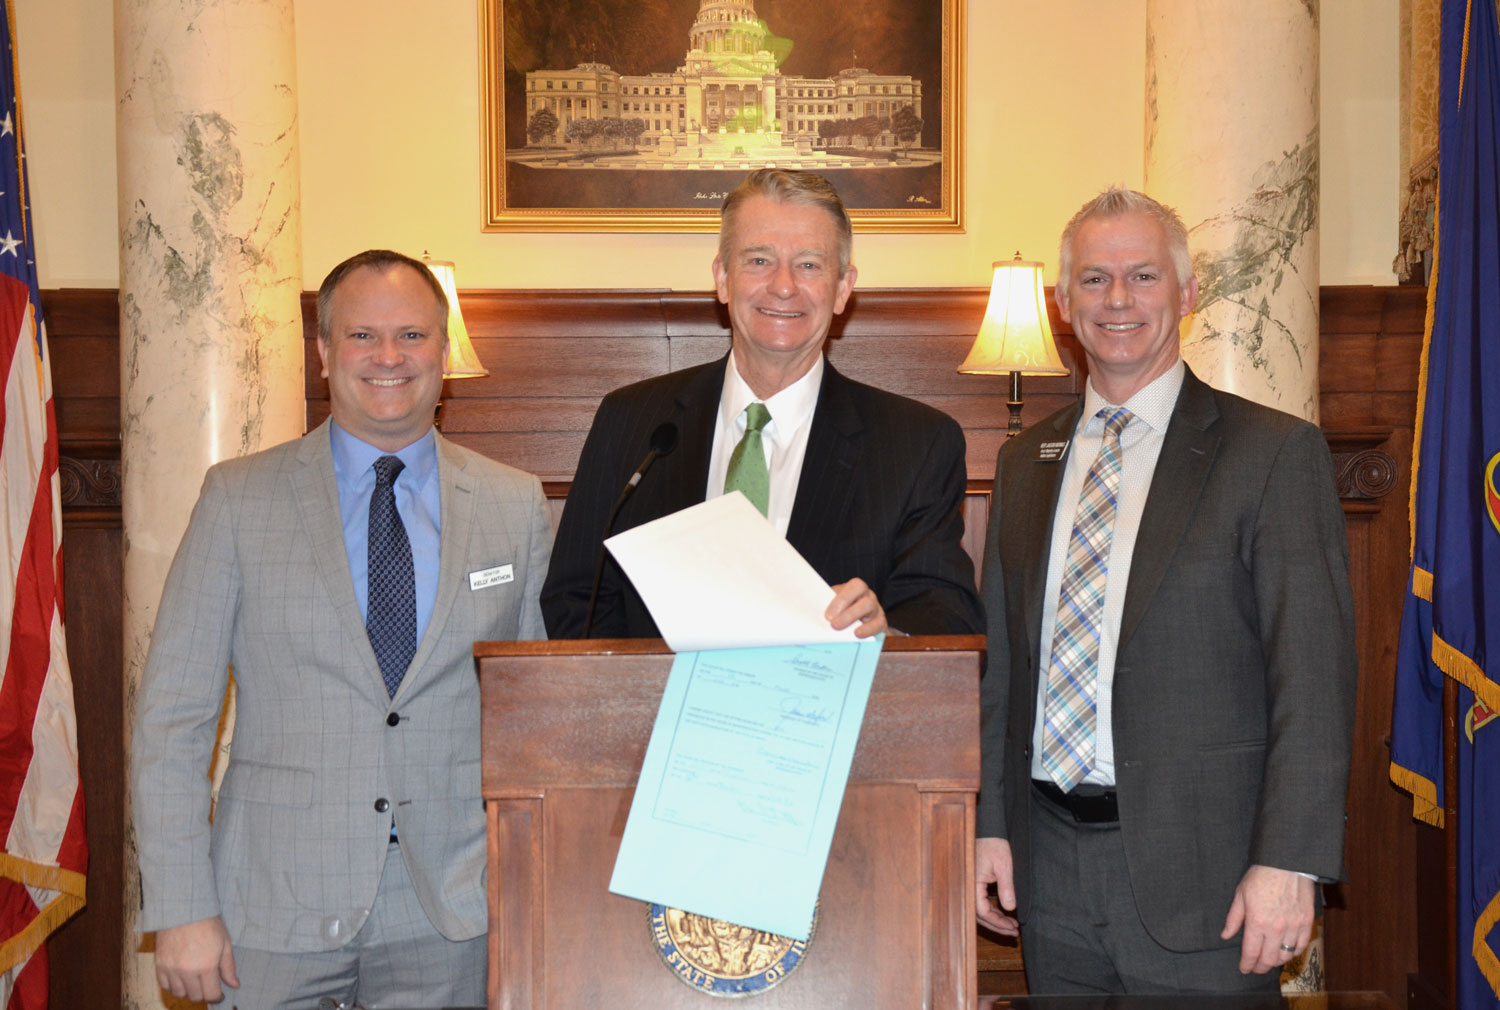 Governor Little signs the Idaho Patient Act into Law March 16th, 2020